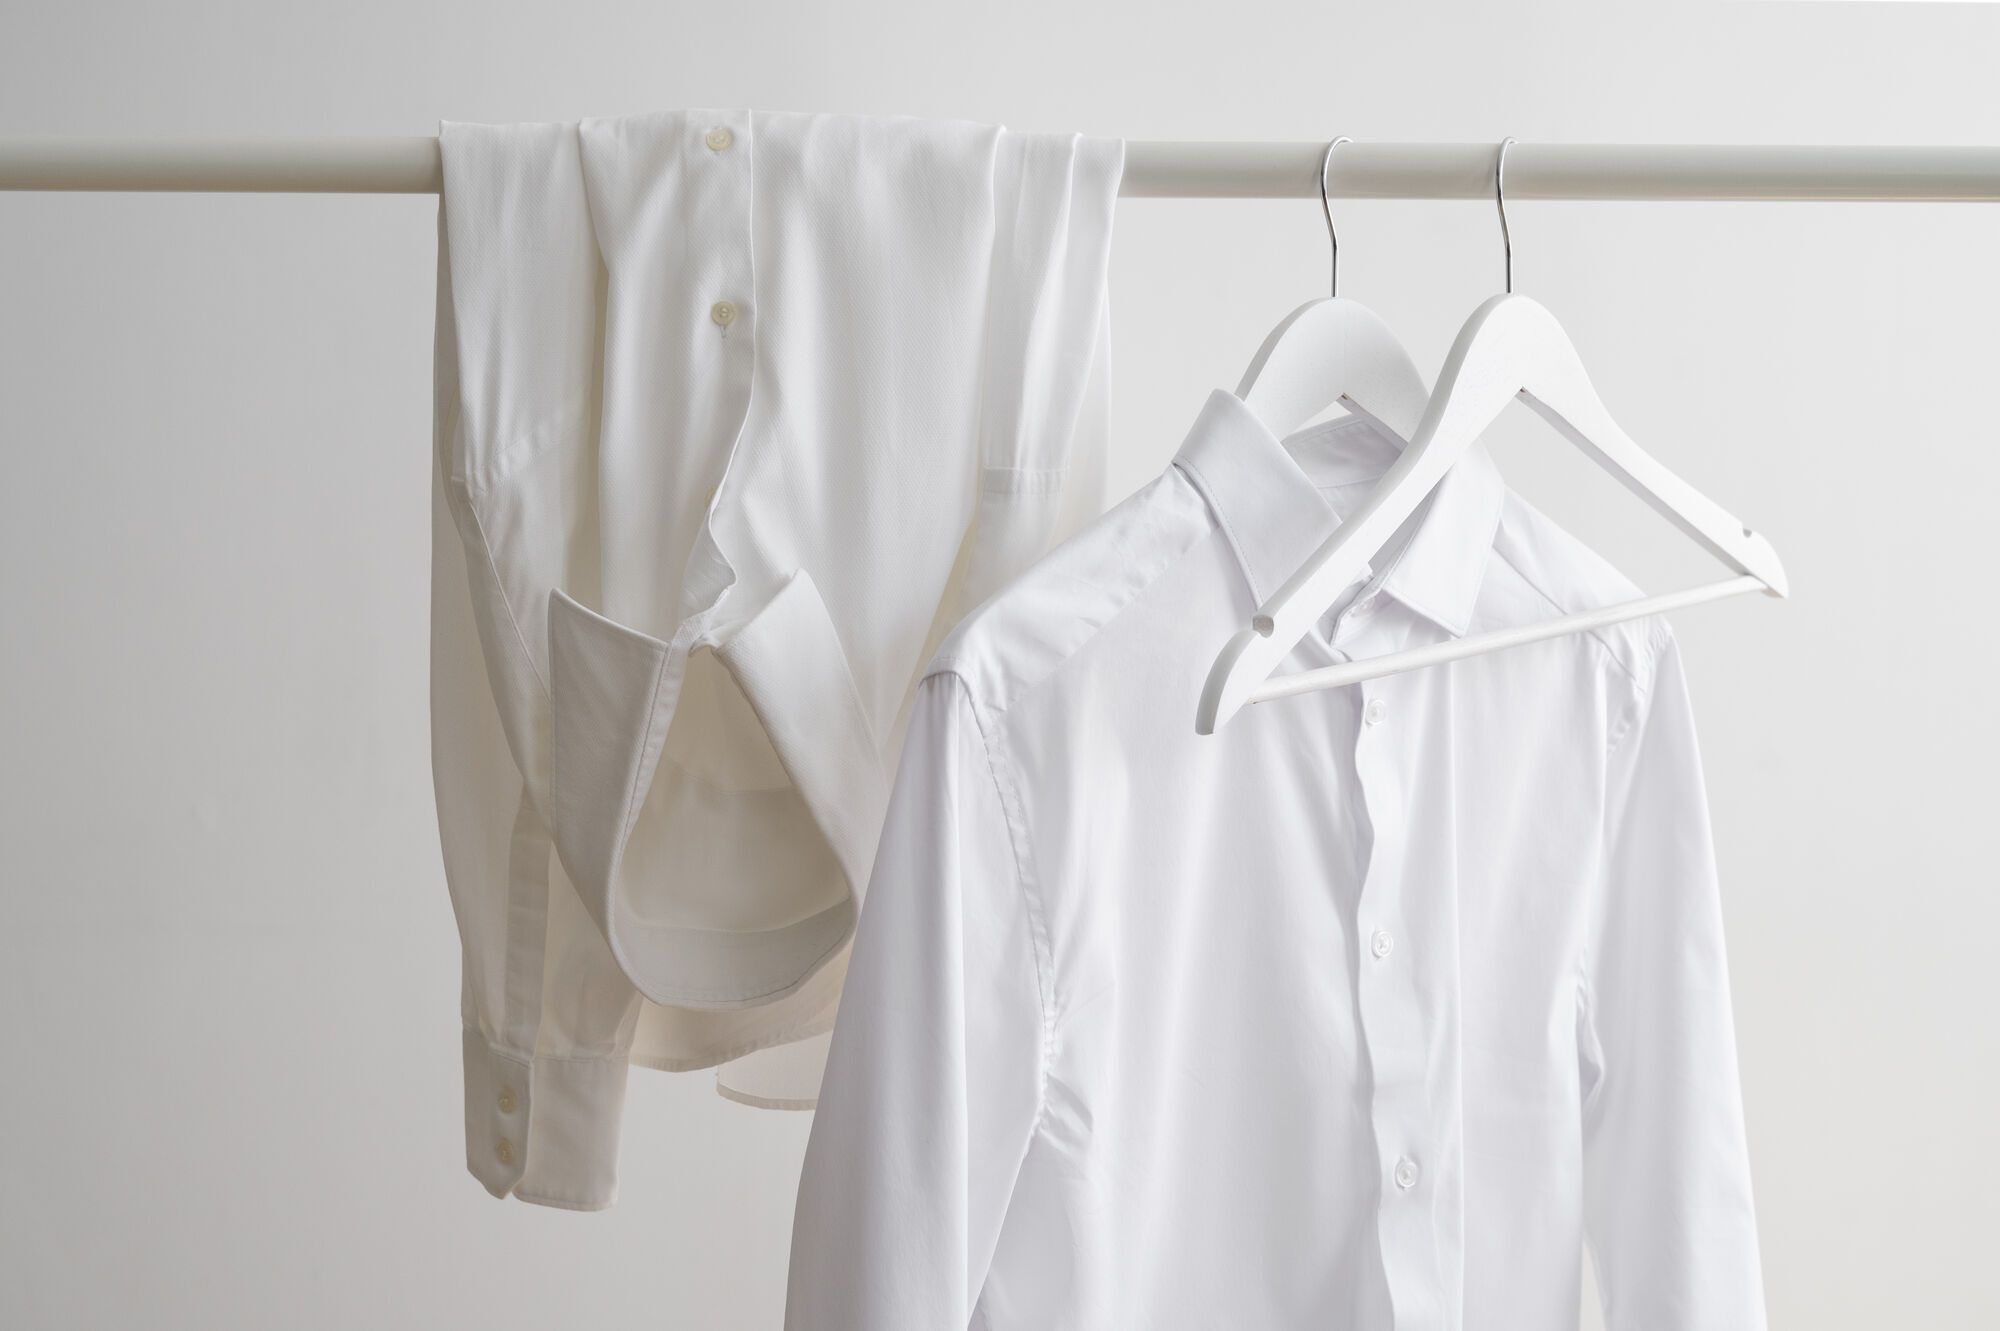 How to wash white clothes: they will always be like new